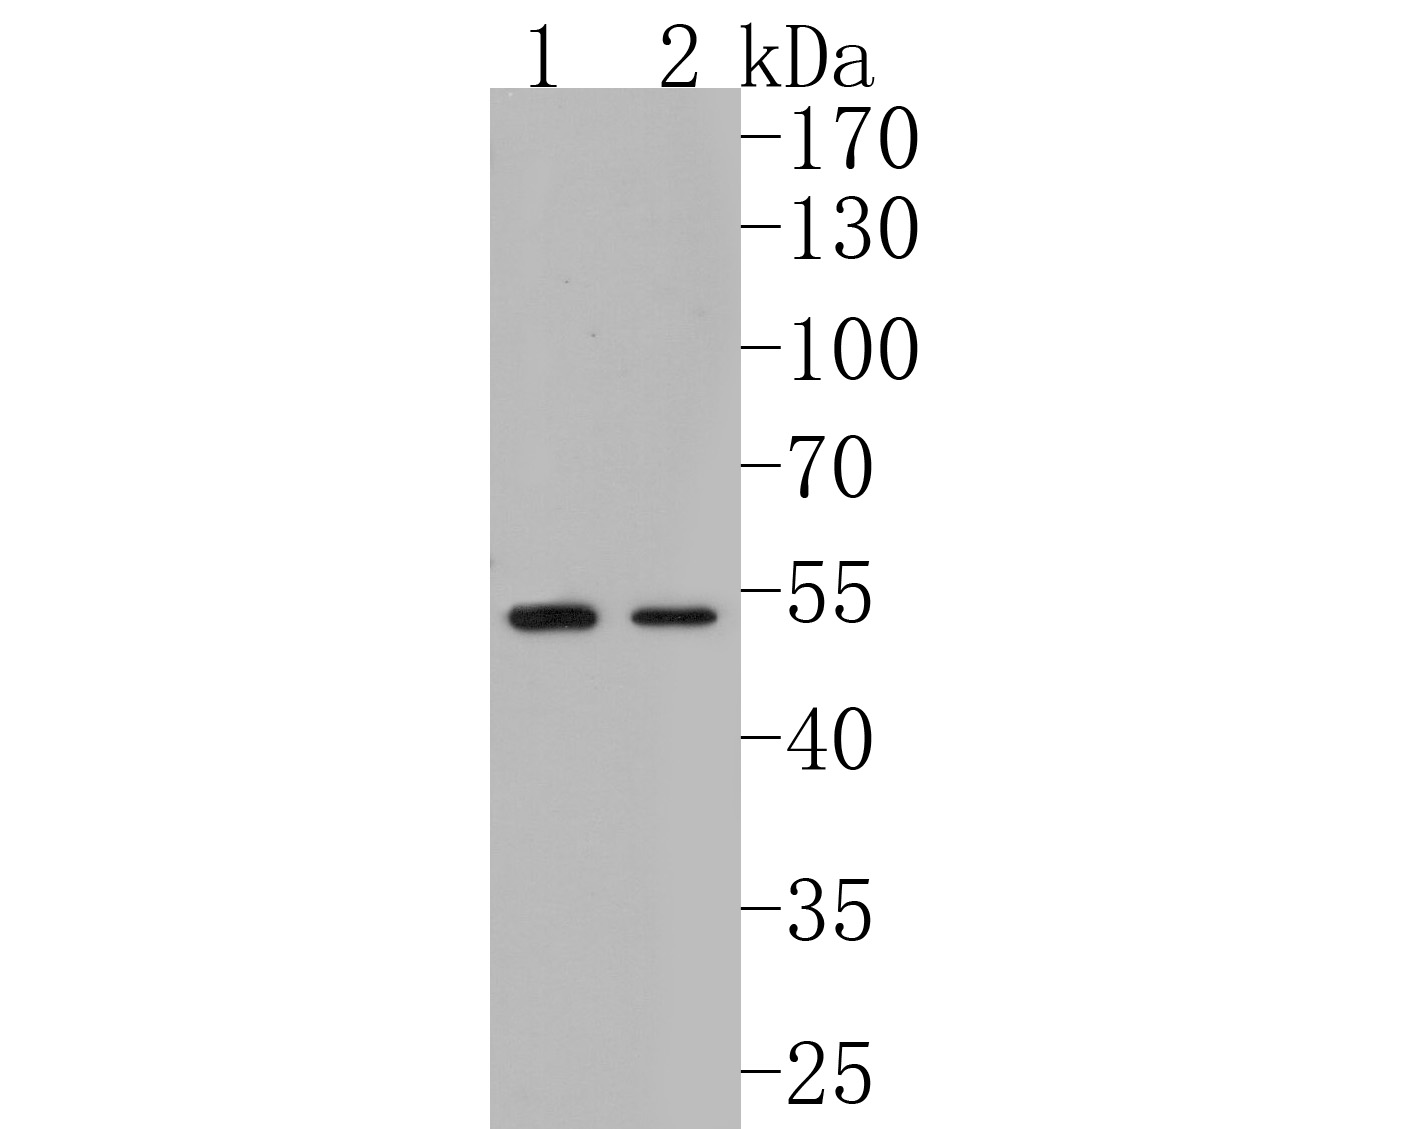 Western blot analysis of Fukutin on different lysates. Proteins were transferred to a PVDF membrane and blocked with 5% BSA in PBS for 1 hour at room temperature. The primary antibody (HA720031, 1/500) was used in 5% BSA at room temperature for 2 hours. Goat Anti-Rabbit IgG - HRP Secondary Antibody (HA1001) at 1:200,000 dilution was used for 1 hour at room temperature.<br />
Positive control: <br />
Lane 1: Jurkat cell lysate<br />
Lane 2: Mouse brain tissue lysate